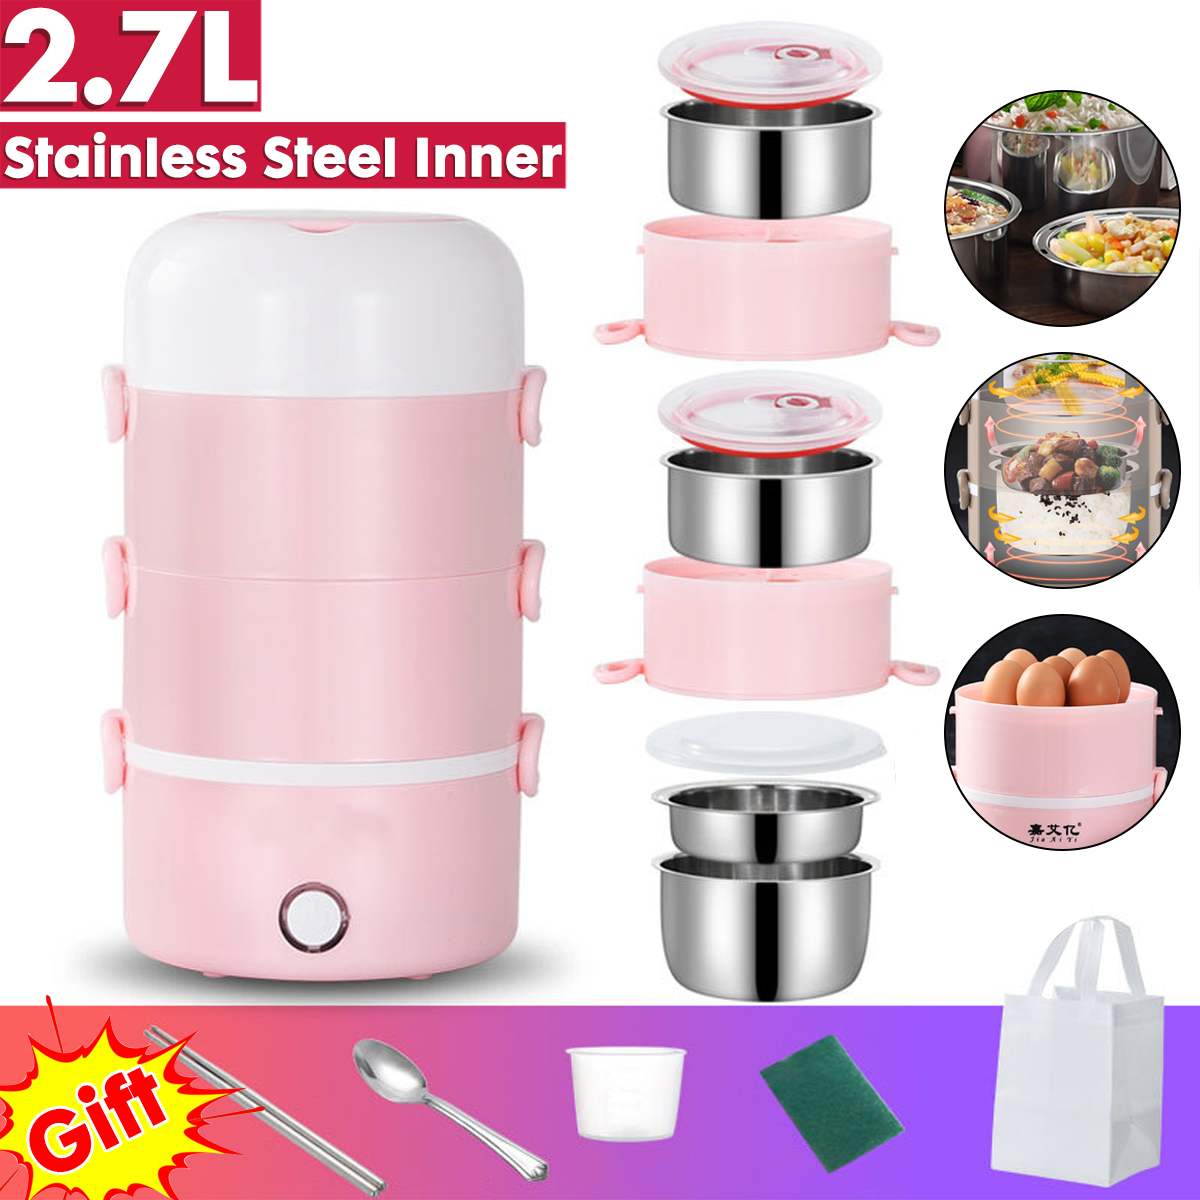 Upgraded Heat Preservation Electric Lunch Box 4 Layers Food Container For Kids Portable Picnic Bento Rice Cooker Food Warmer AU